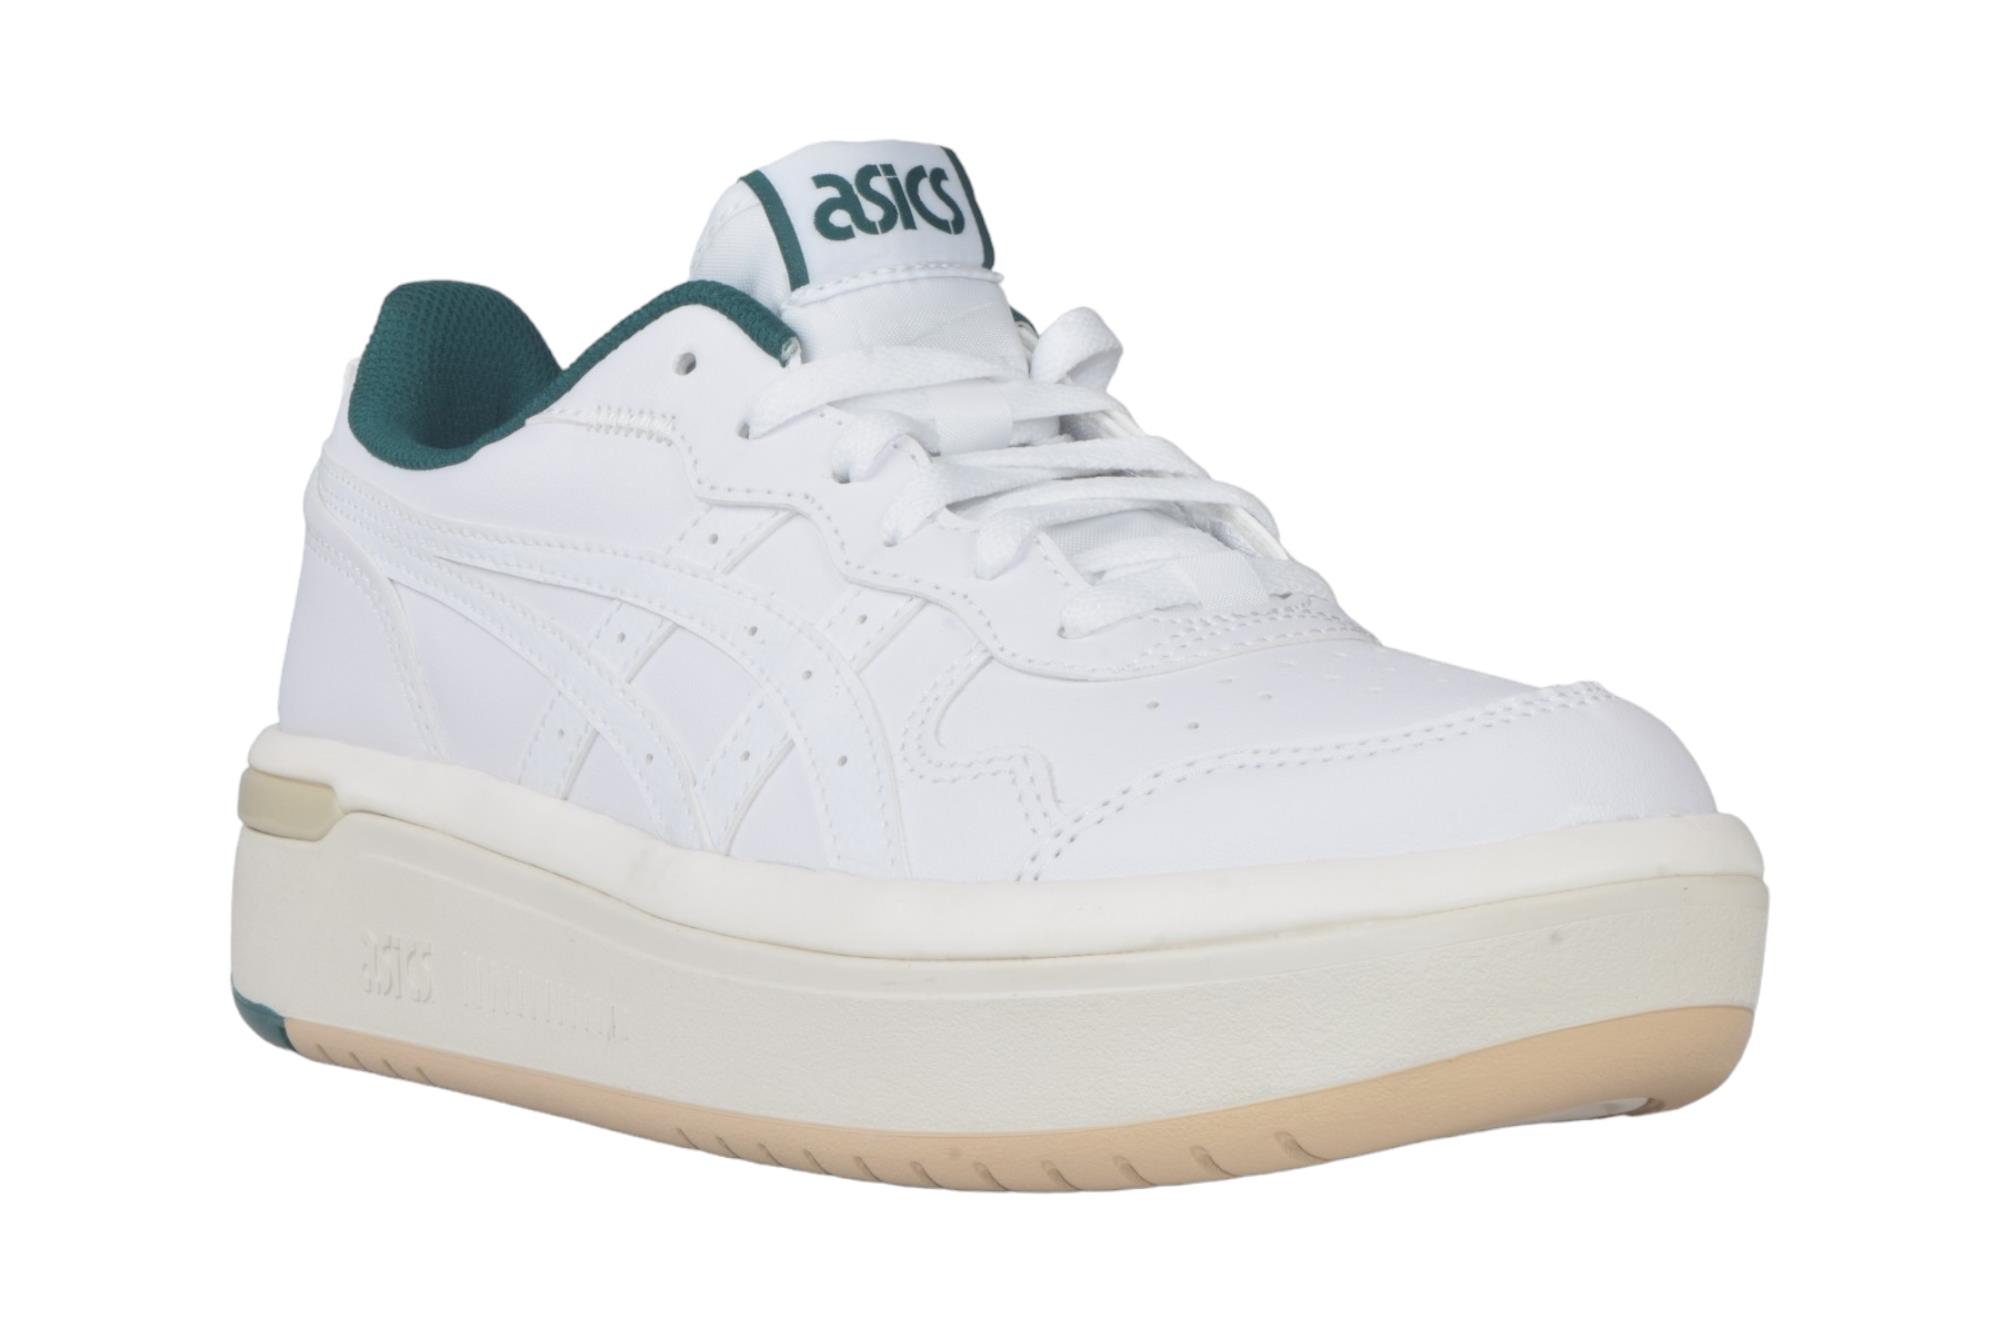 Asics WHITE/JEWEL GREEN SNEAKERS ::PARMAR BOOT HOUSE | Buy 